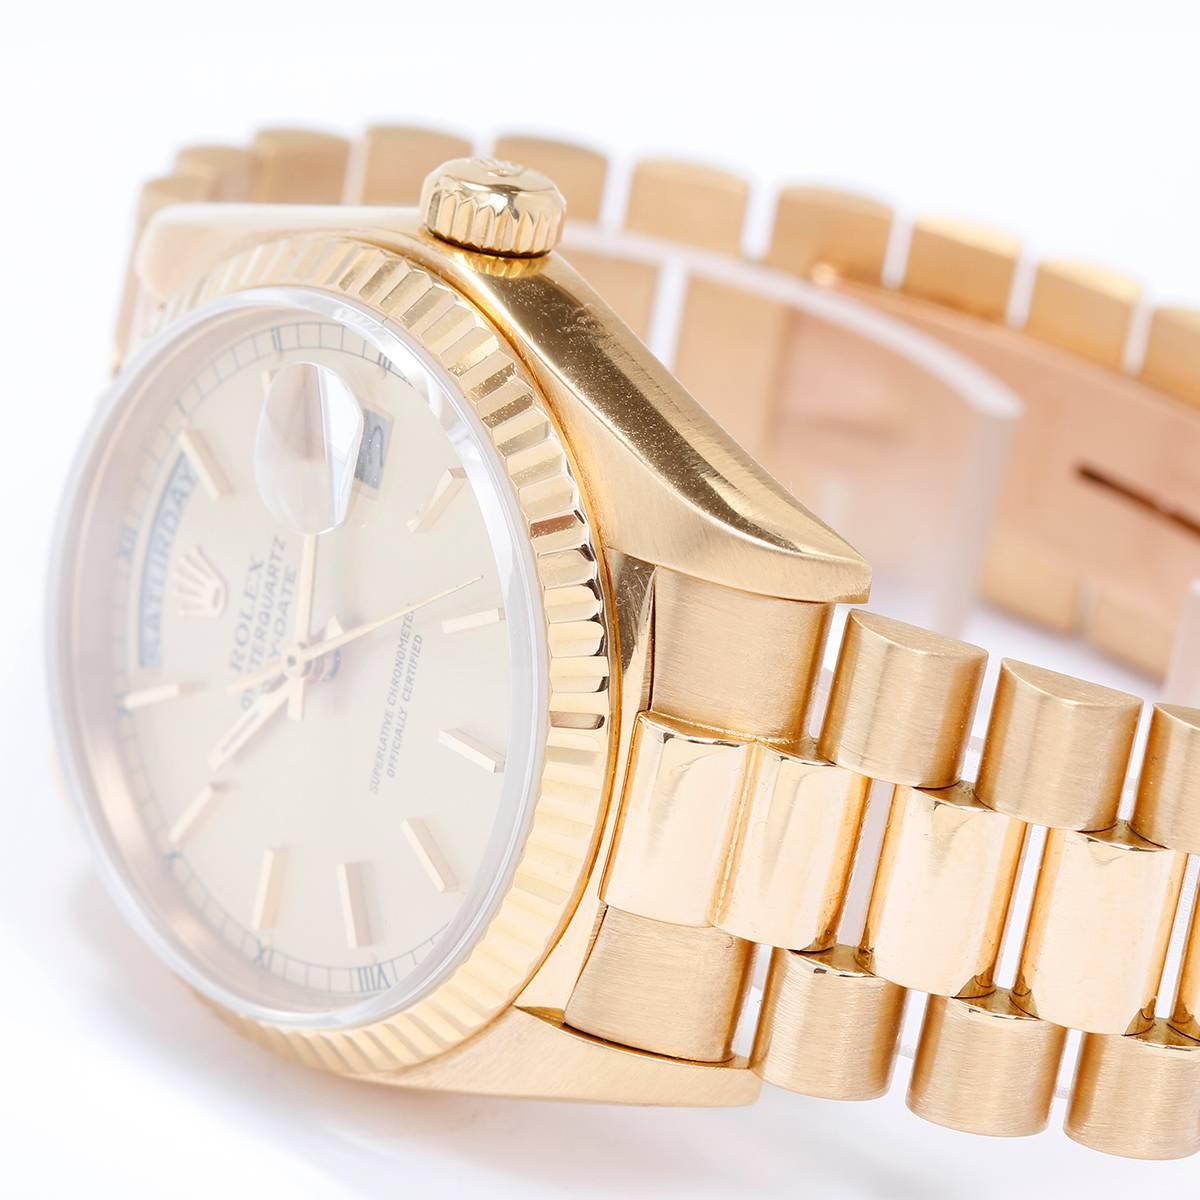 Men's Gold Day-Date Rolex President Watch 18038 -  Automatic winding; quick-set; sapphire crystal. 18k yellow gold case with fluted bezel (36mm diameter). Champagne dial with gold stick markers. 18k yellow gold President bracelet. Pre-owned with